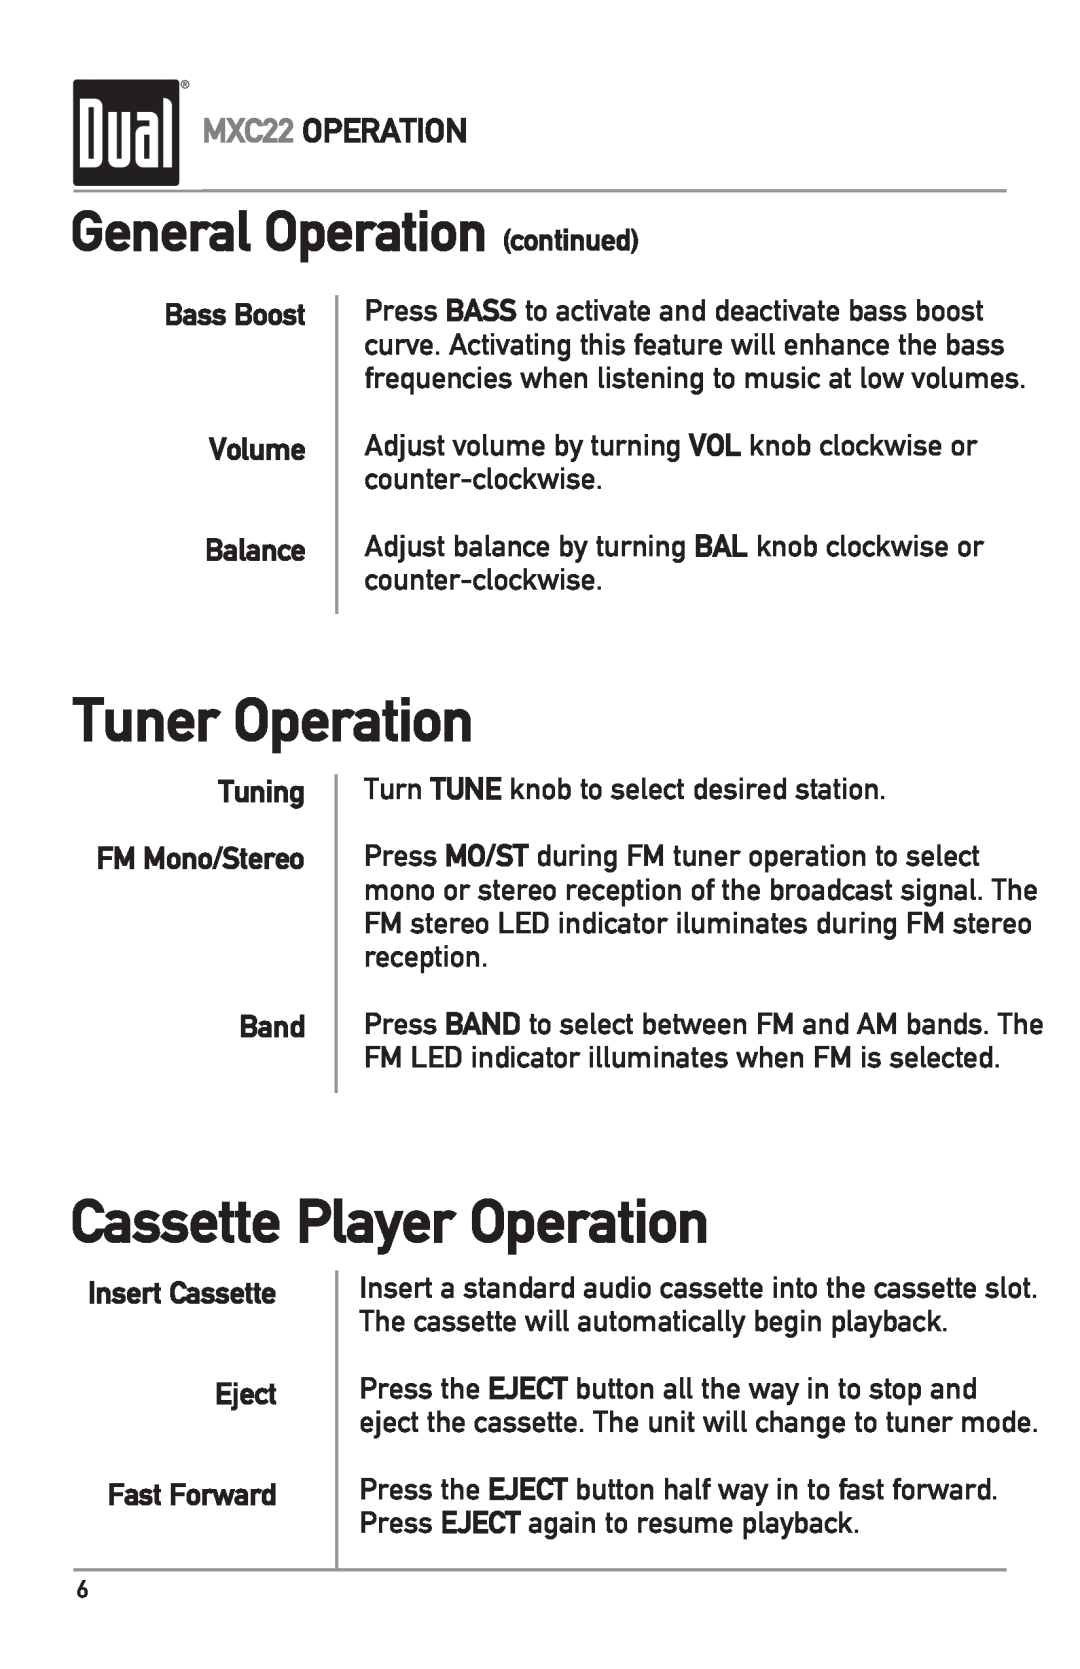 Dual owner manual General Operation continued, Tuner Operation, Cassette Player Operation, MXC22 OPERATION 